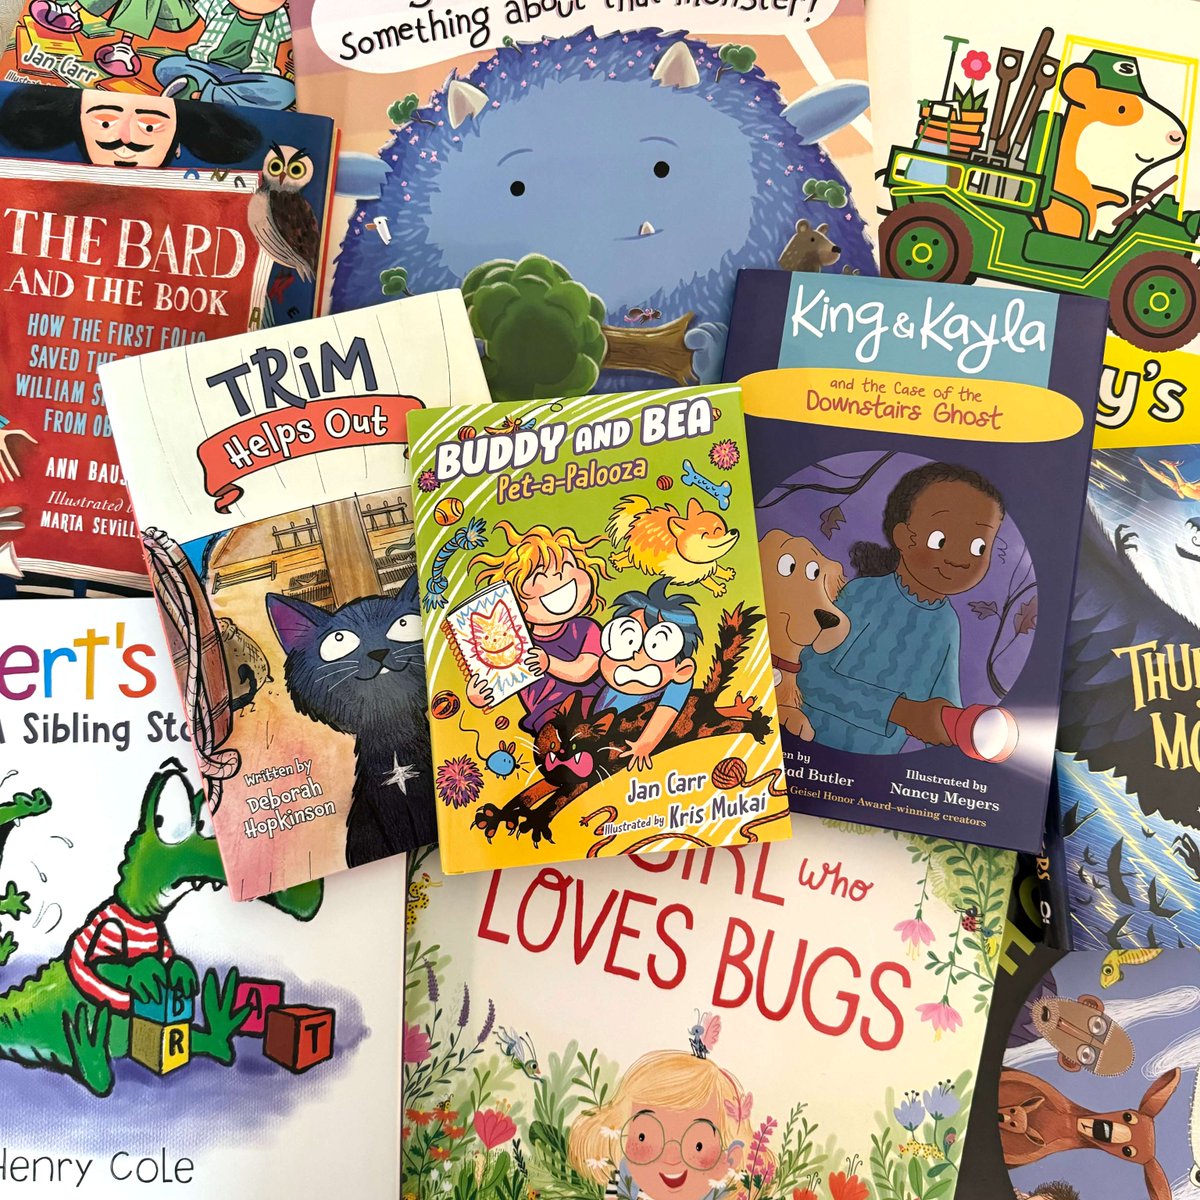 Happy Indie Bookstore Day! Head to your local independent bookstore and add these books to your little one's library today! ow.ly/5fZb50RpxUS peachtreebooks.com/book/stanley-t… peachtreebooks.com/book/pet-a-pal… peachtreebooks.com/book/trim-save… peachtreebooks.com/book/the-girl-… #kidlit